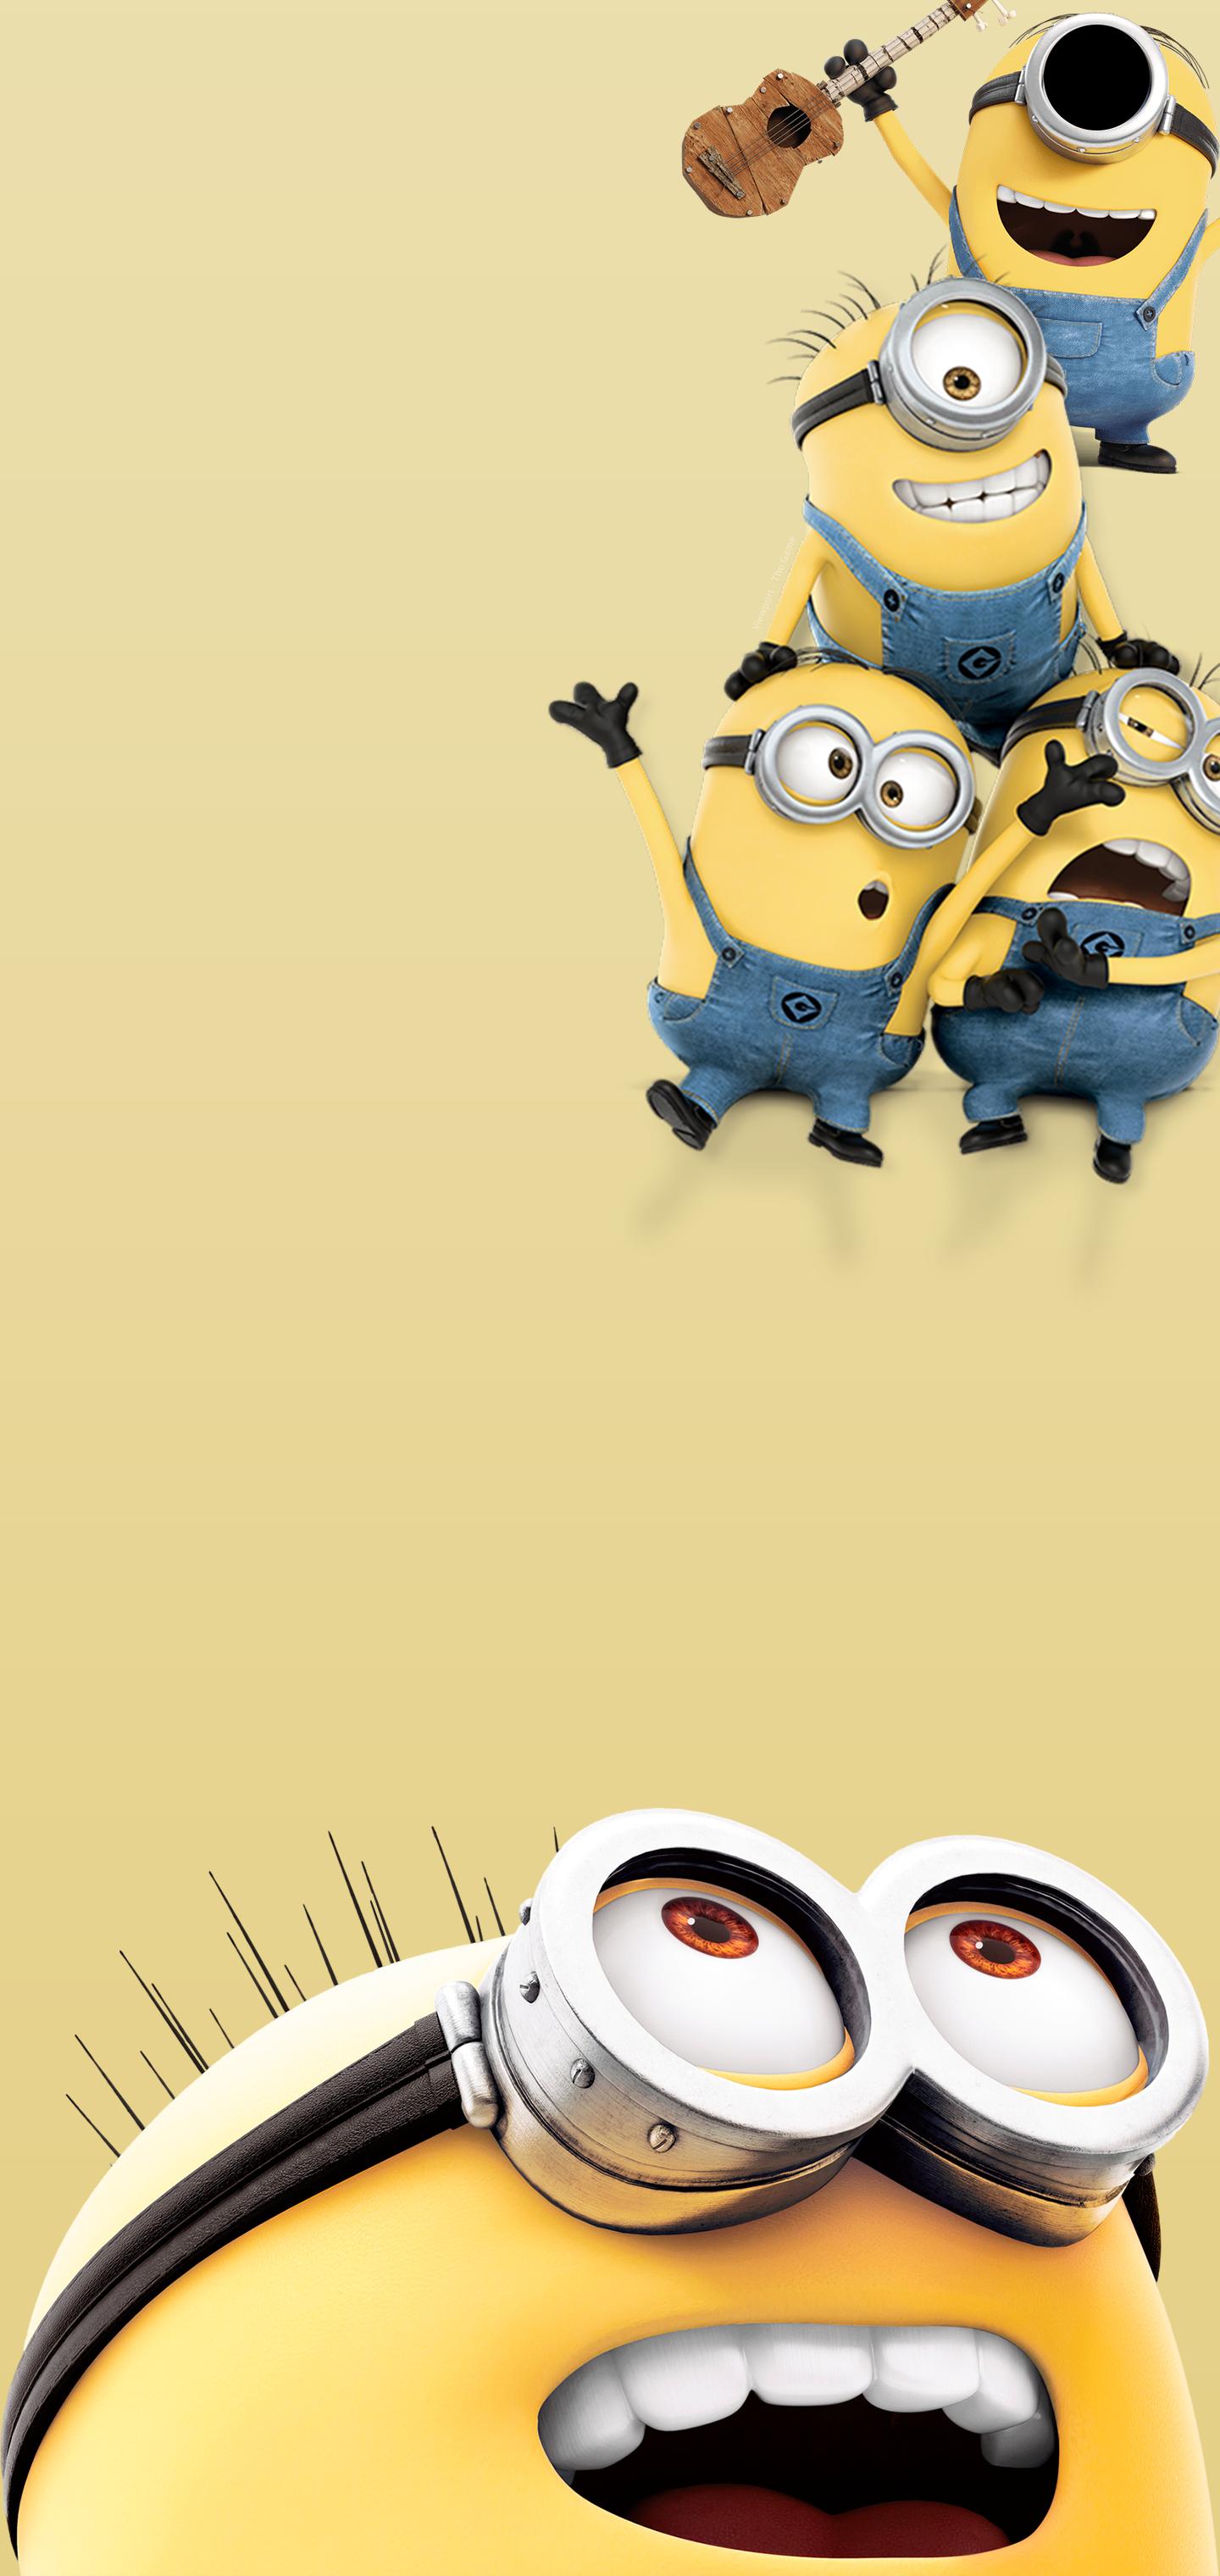 Band of Minions of Despicable Me by BlackBindy Galaxy S10 Hole